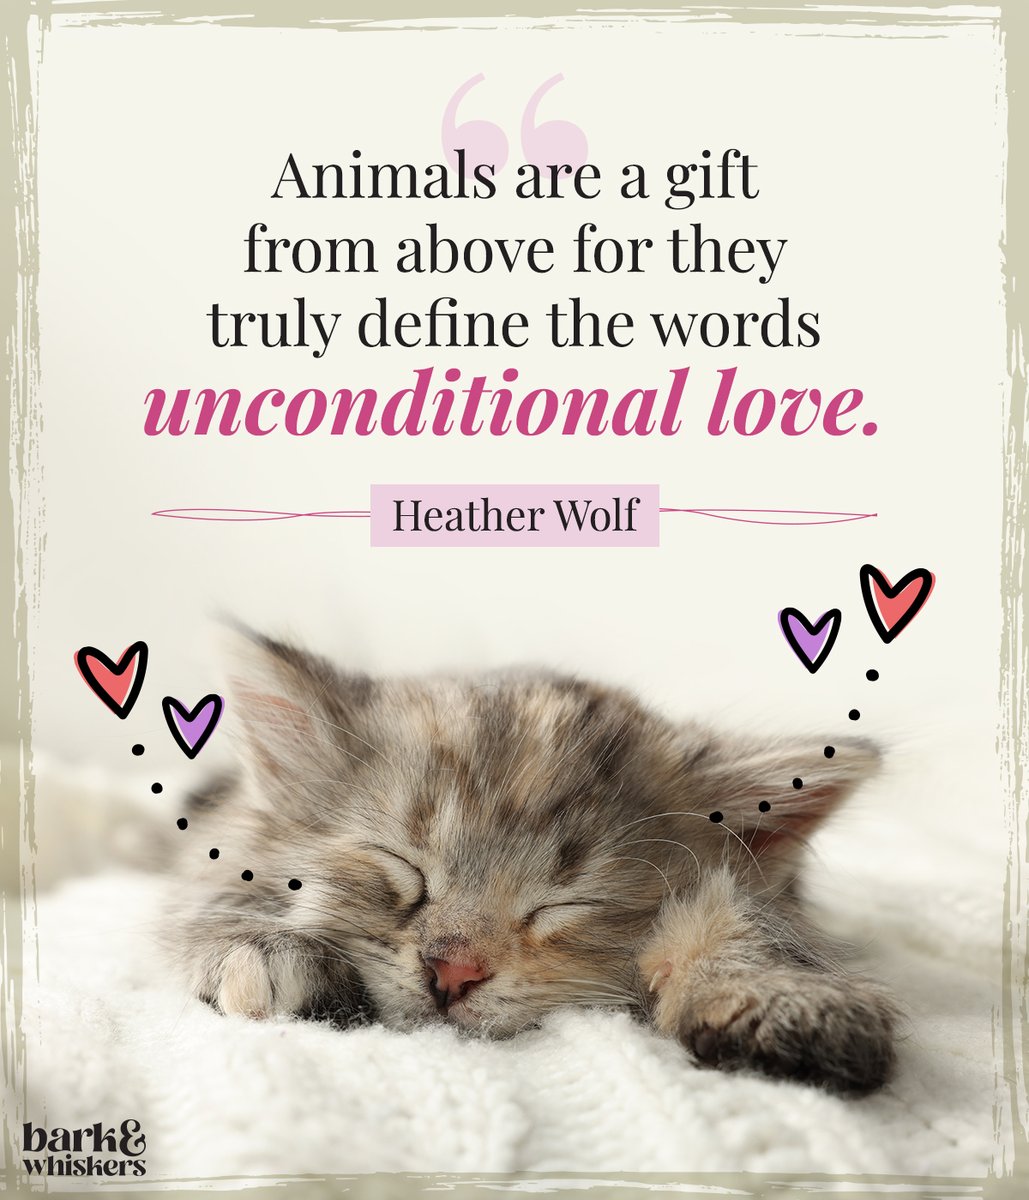 In the gentle eyes of our pets, we find the purest form of love. 💗

#PetLove #UnconditionalLove #barkandwhiskers